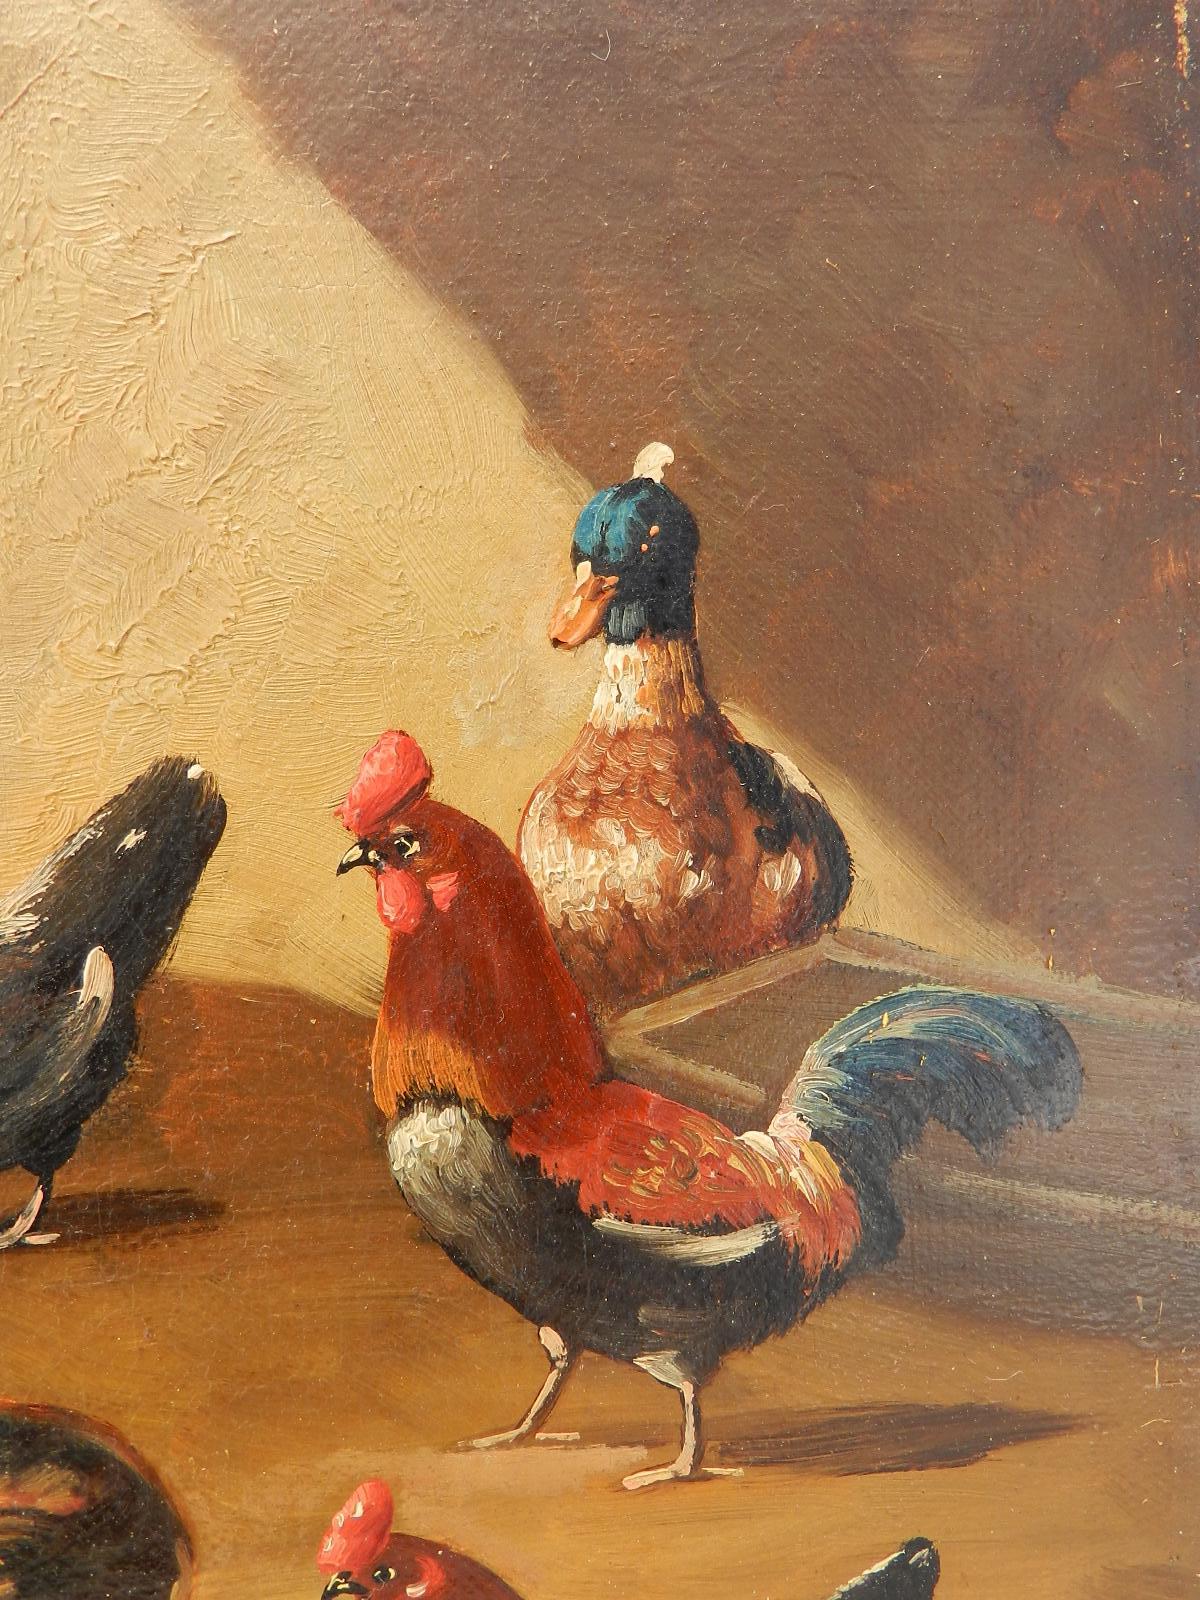 French Farmyard Oil Painting signed Lambert French 19th century
Sunny yard with Ducks and Chickens 
Will send with its now distressed frame if requested to
Good antique condition with minor signs of age to the painting itself which has been behind